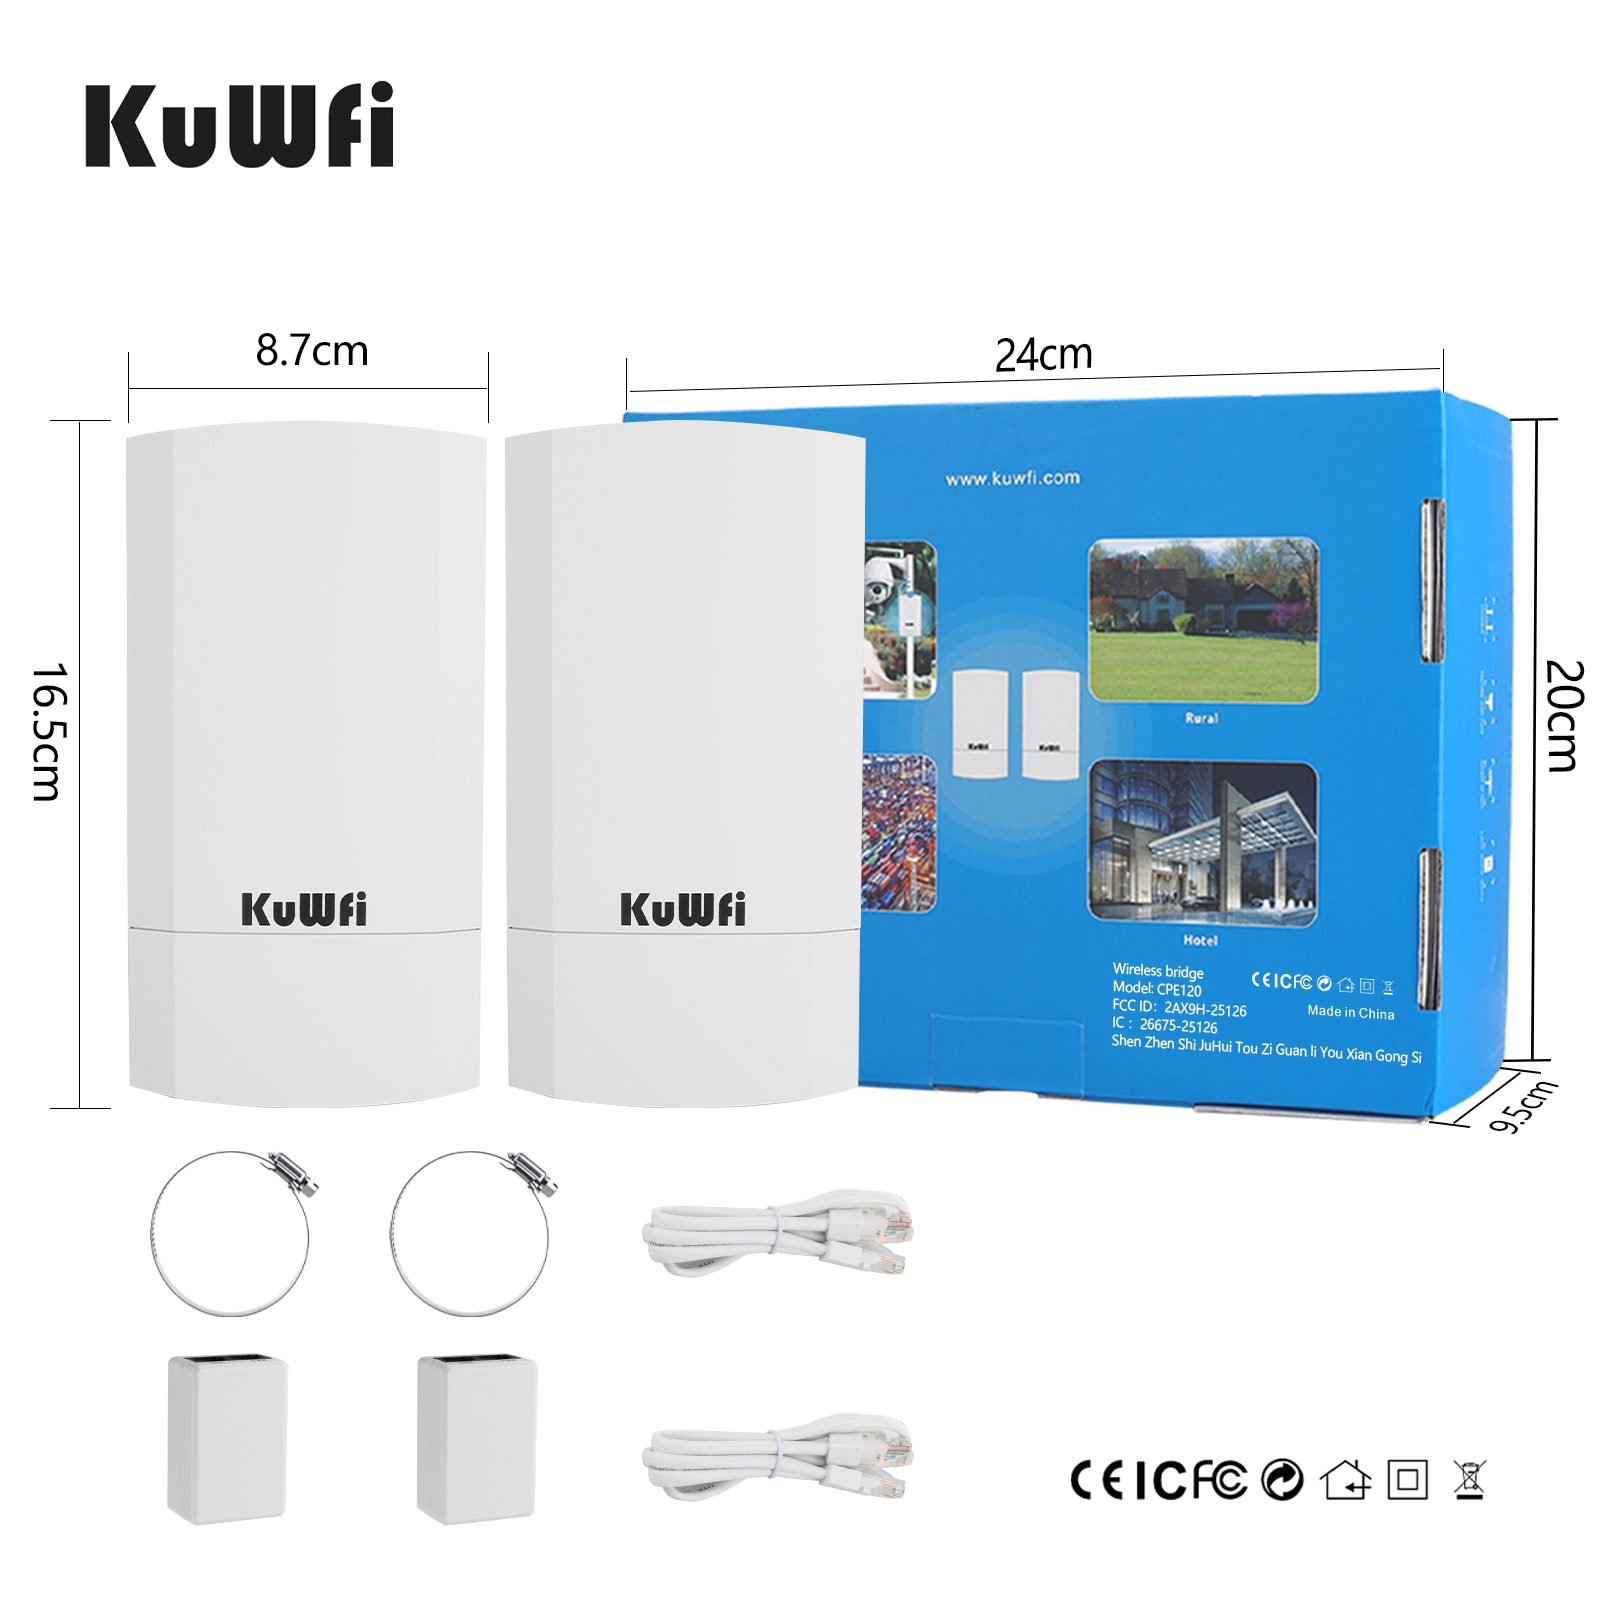 KuWfi Router 1KM 300Mbps Wireless Router Outdoor&Indoor CPE Router Kit Wireless Bridge Wifi Repeater Support WDS Long Range